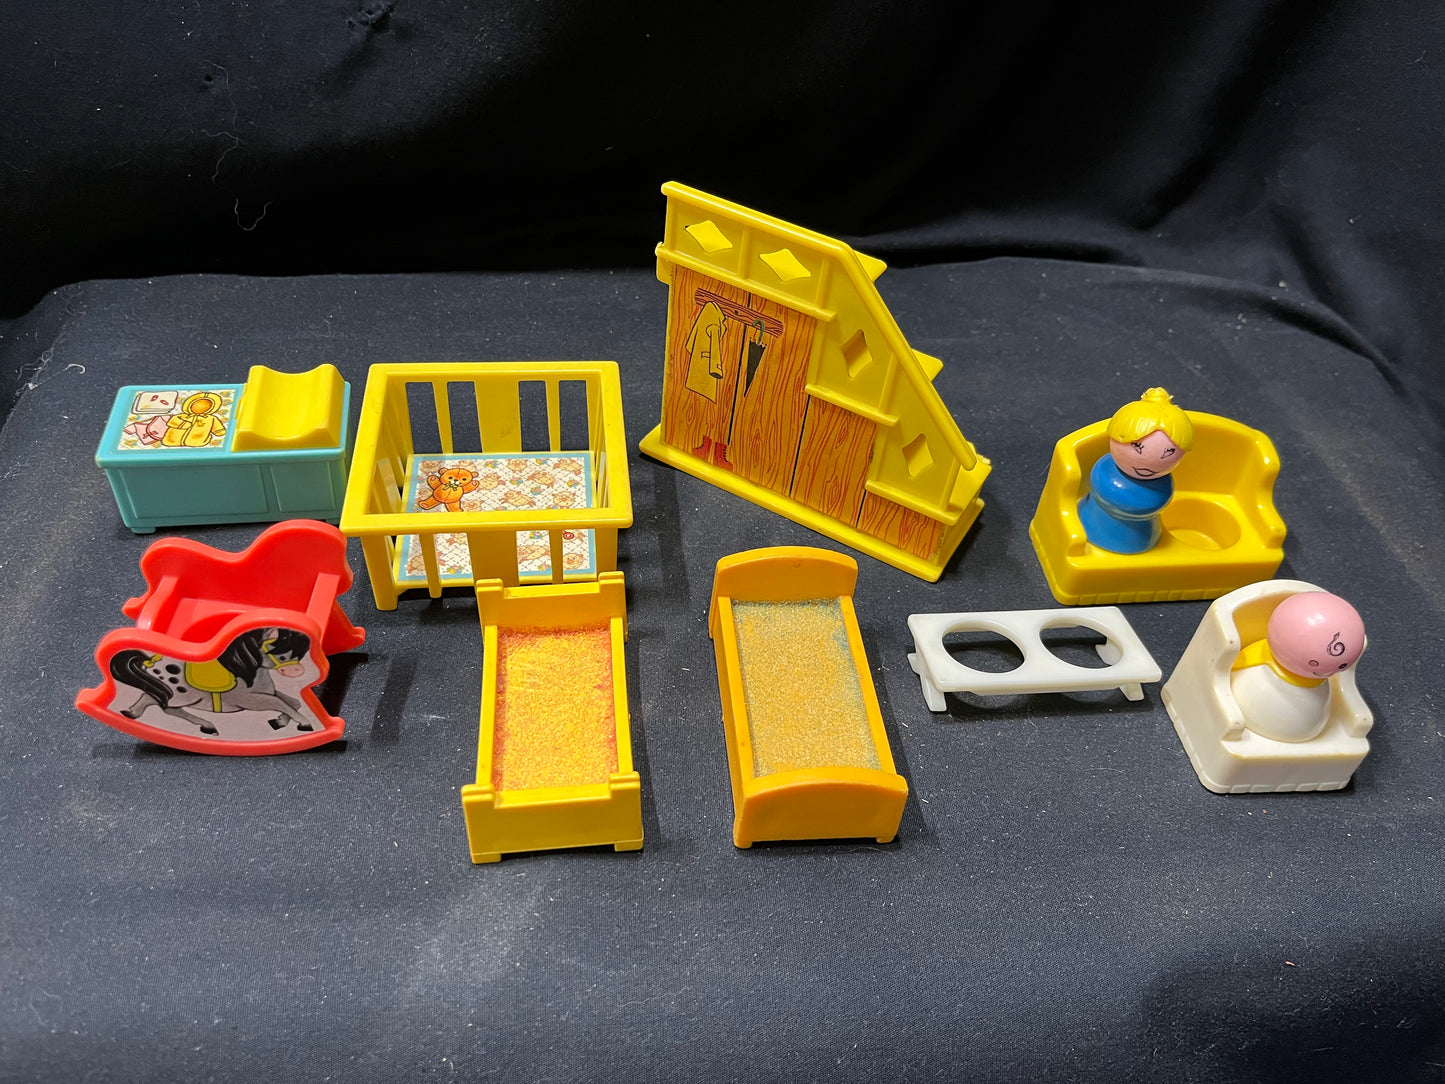 Vintage Fisher Price Play Family House and Accessories #952